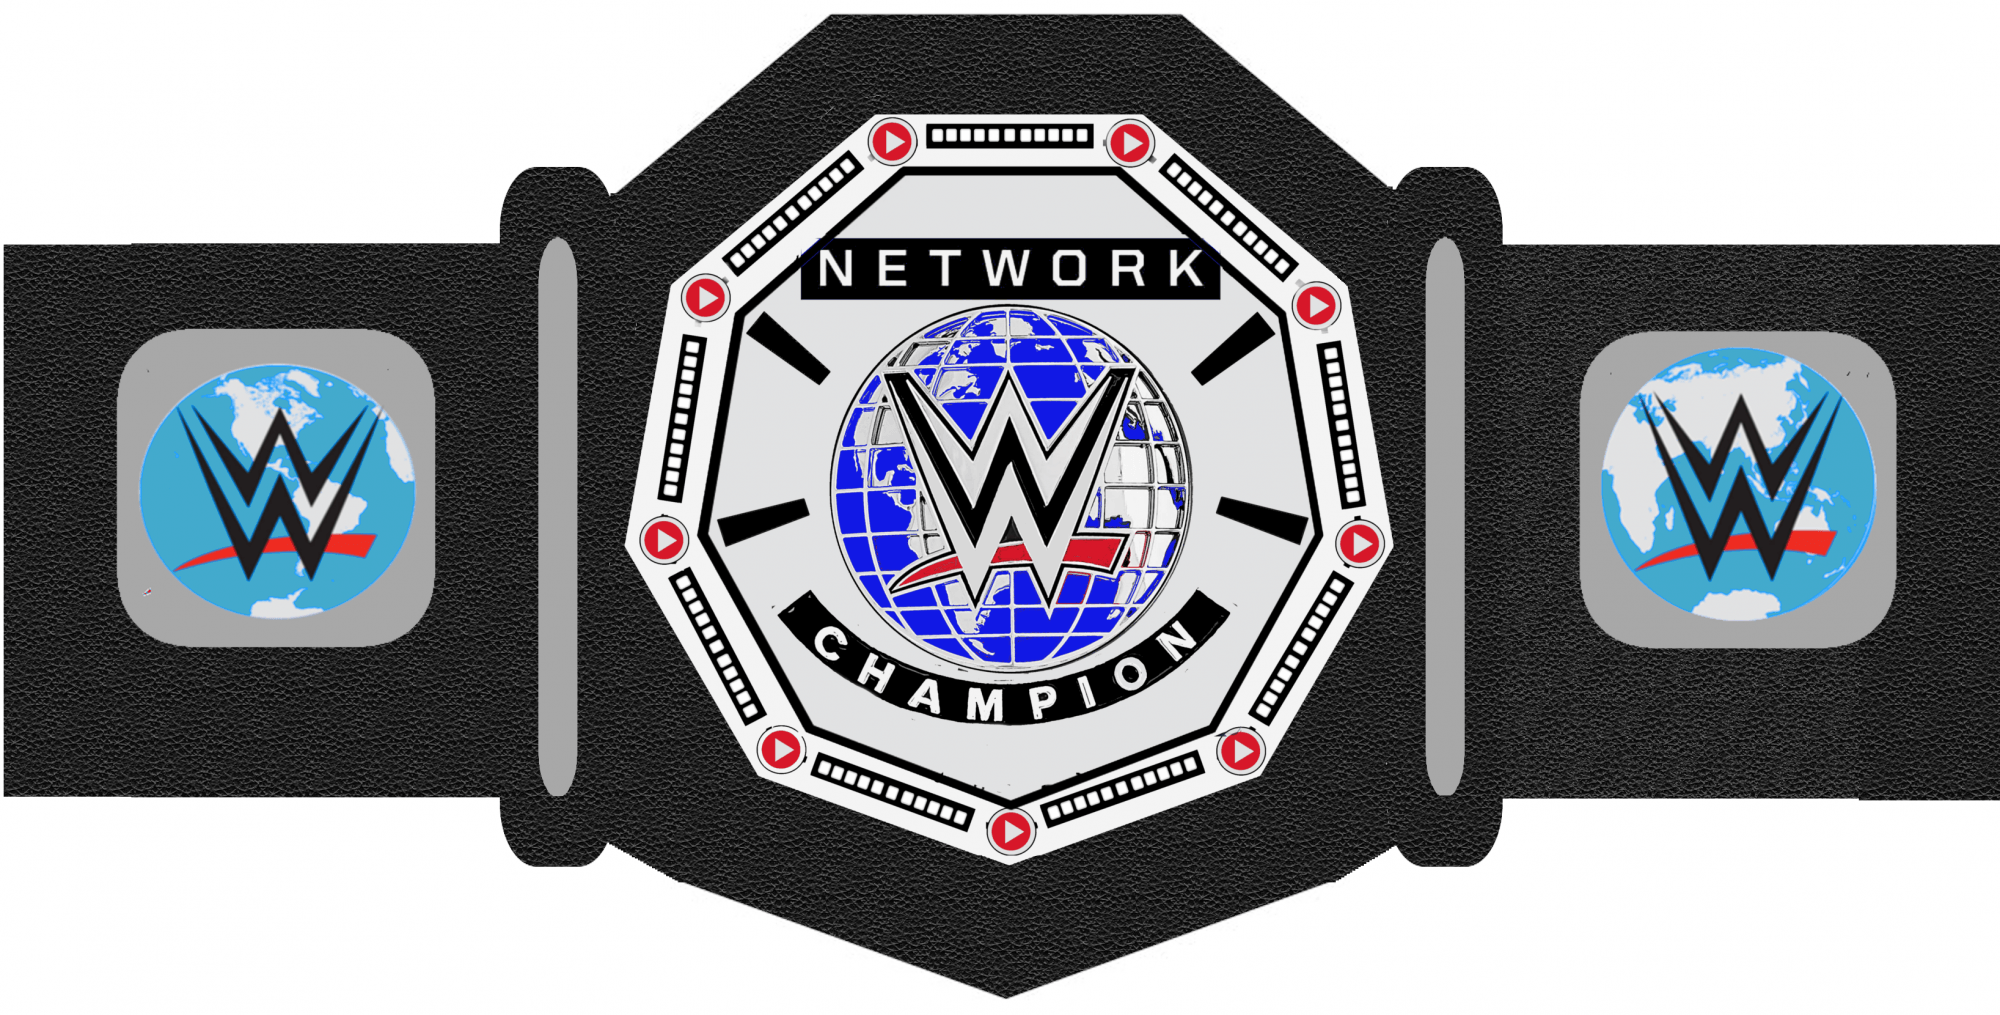 Blets Title Logo - WWE Network Title (created in GIMP) Creamer's